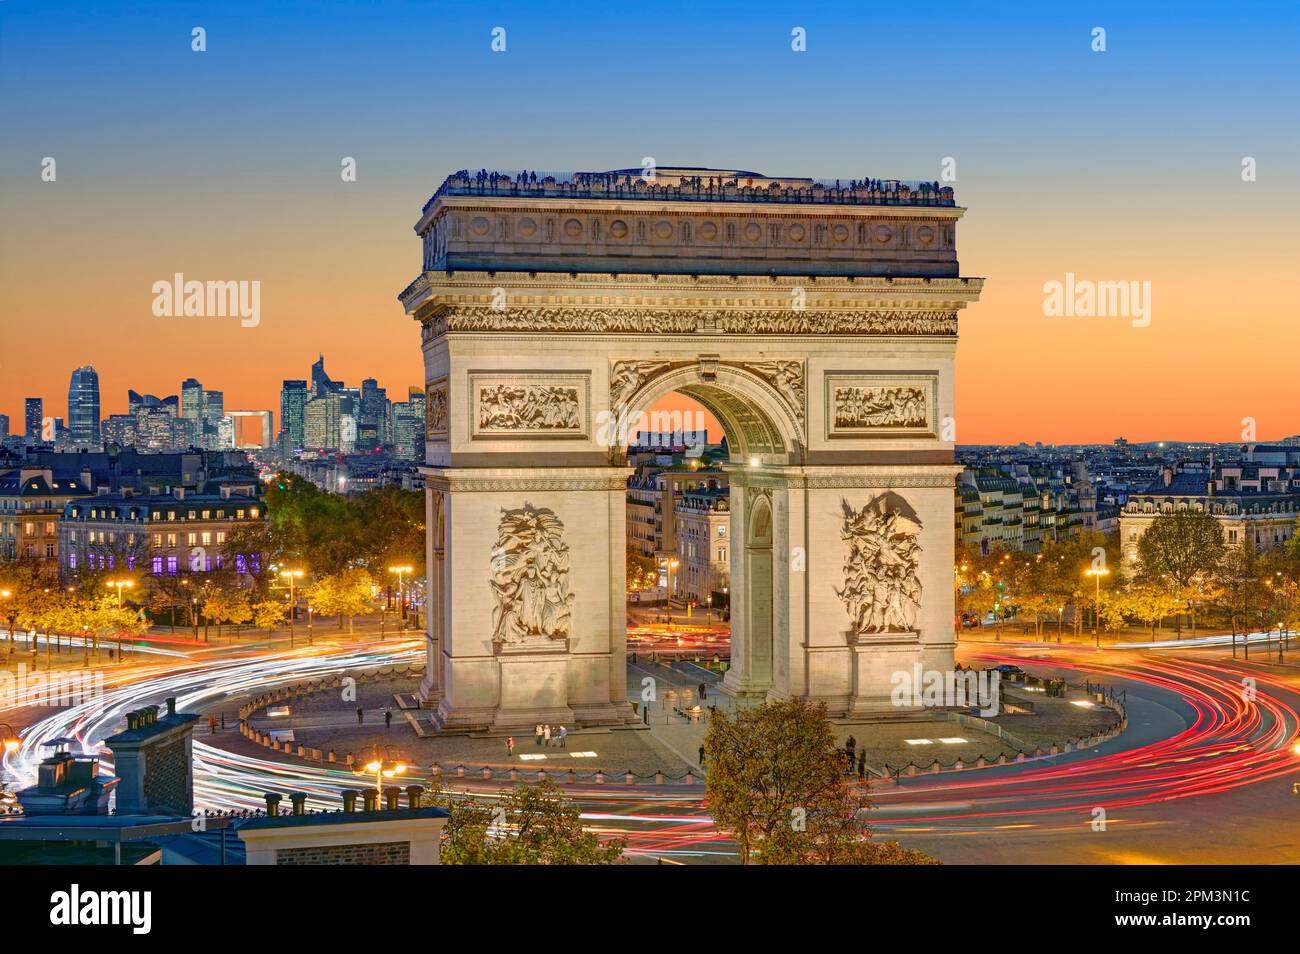 Paris Travel Guide: Timeless Attractions and Landmarks